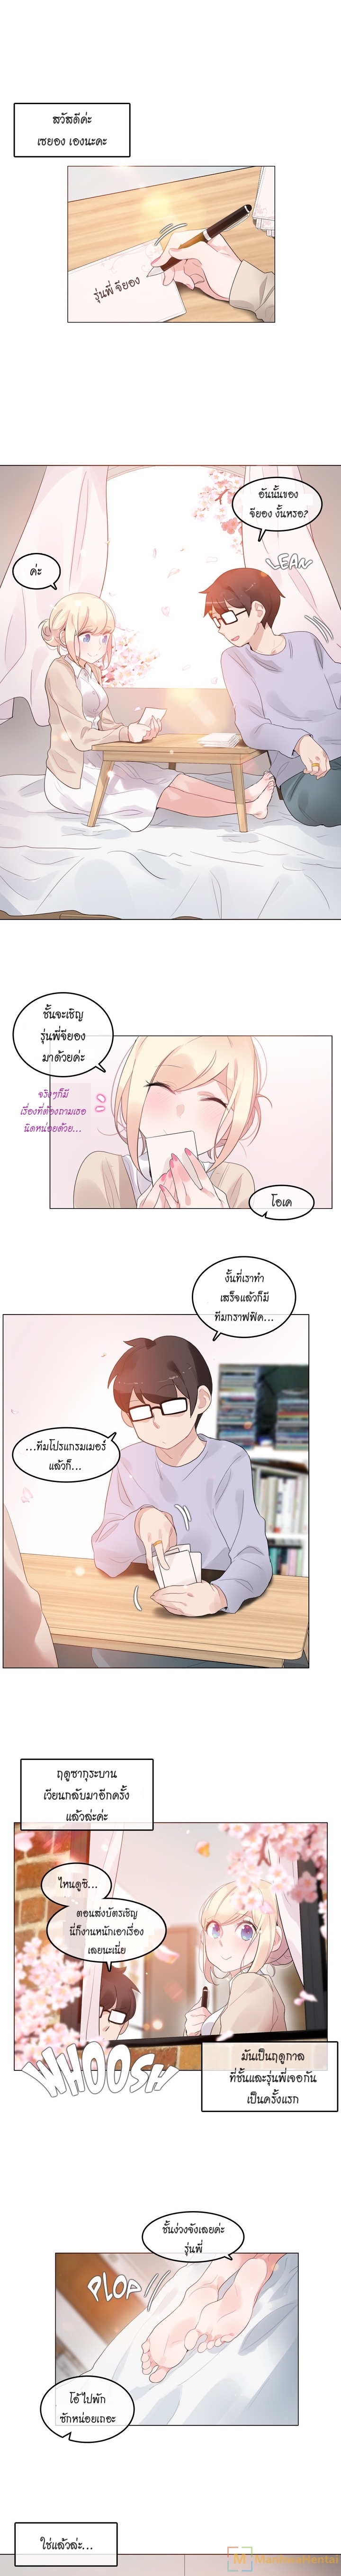 A Pervert’s Daily Life58 (1)